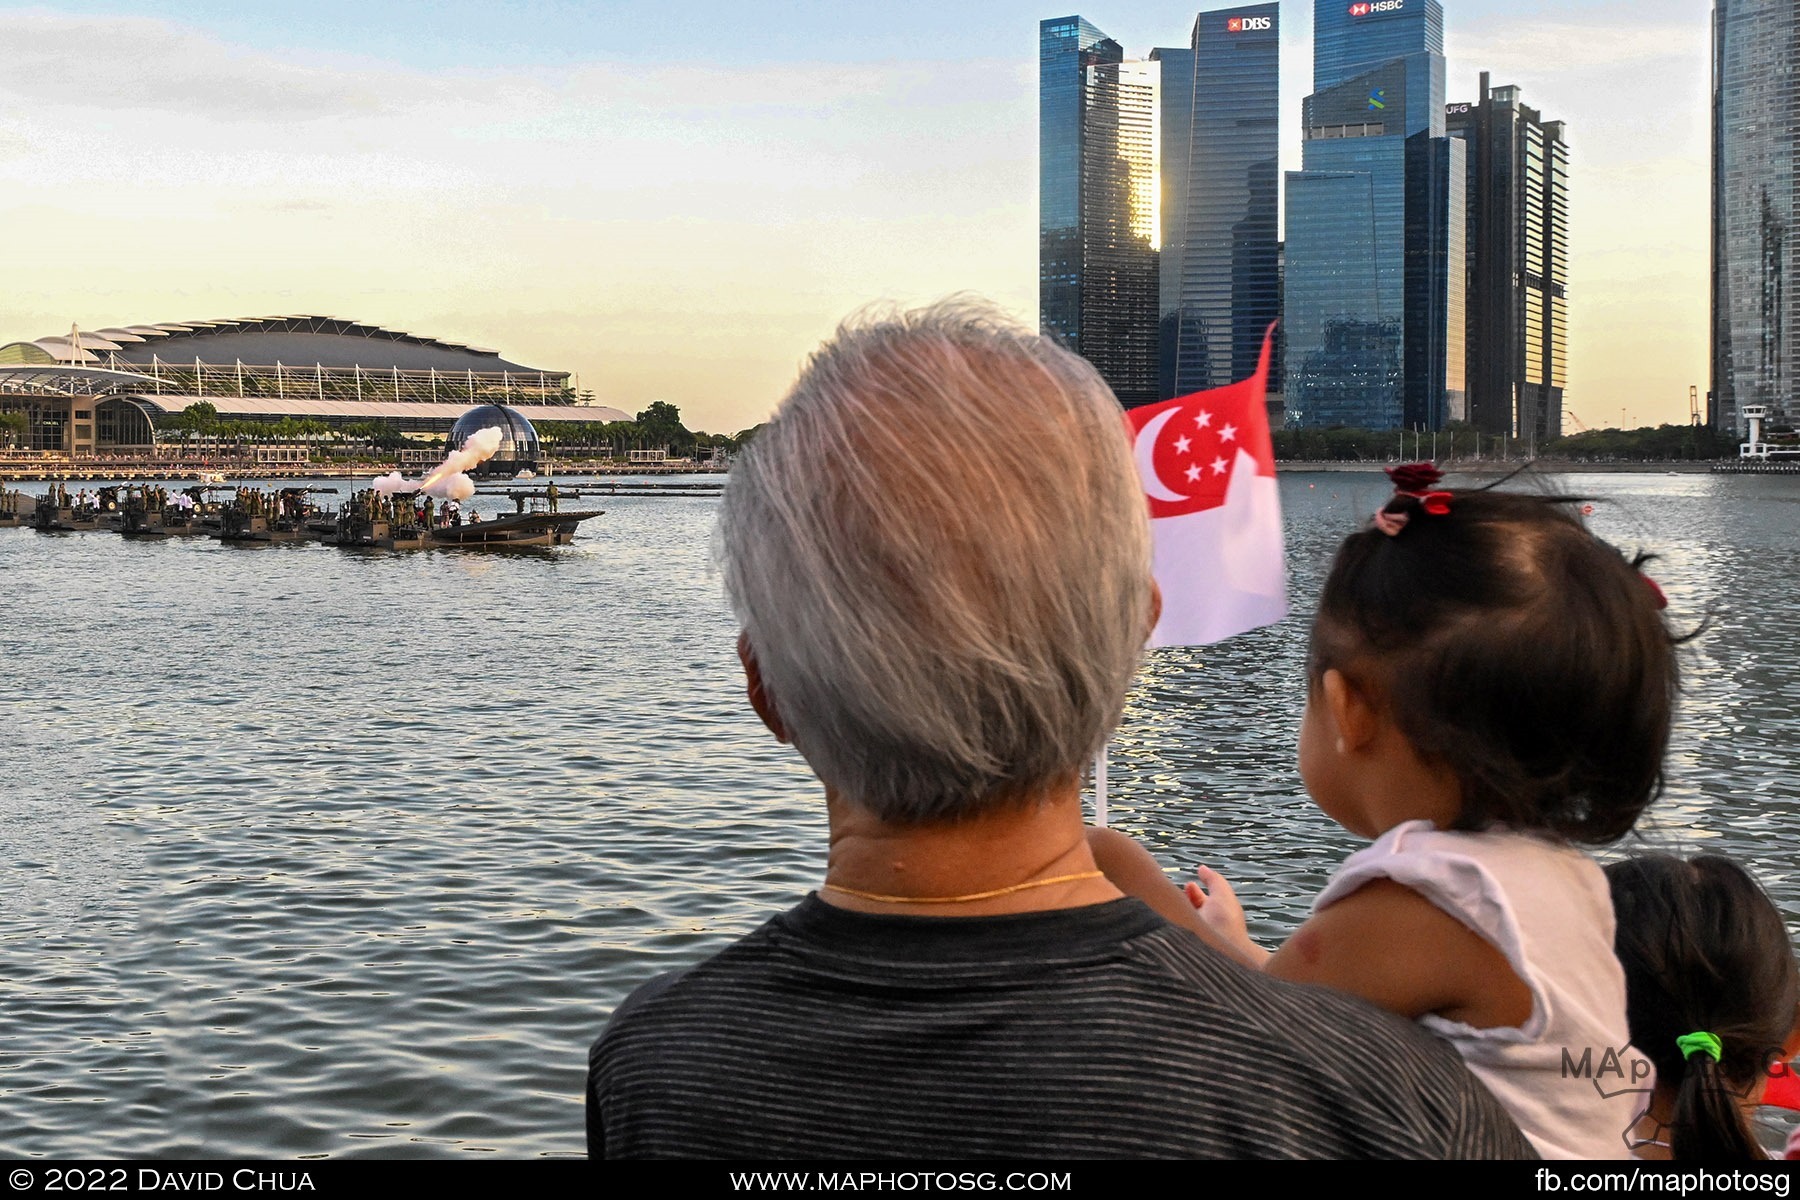 Spectators at Esplanade Waterfront had a great view of the 21 gun salute